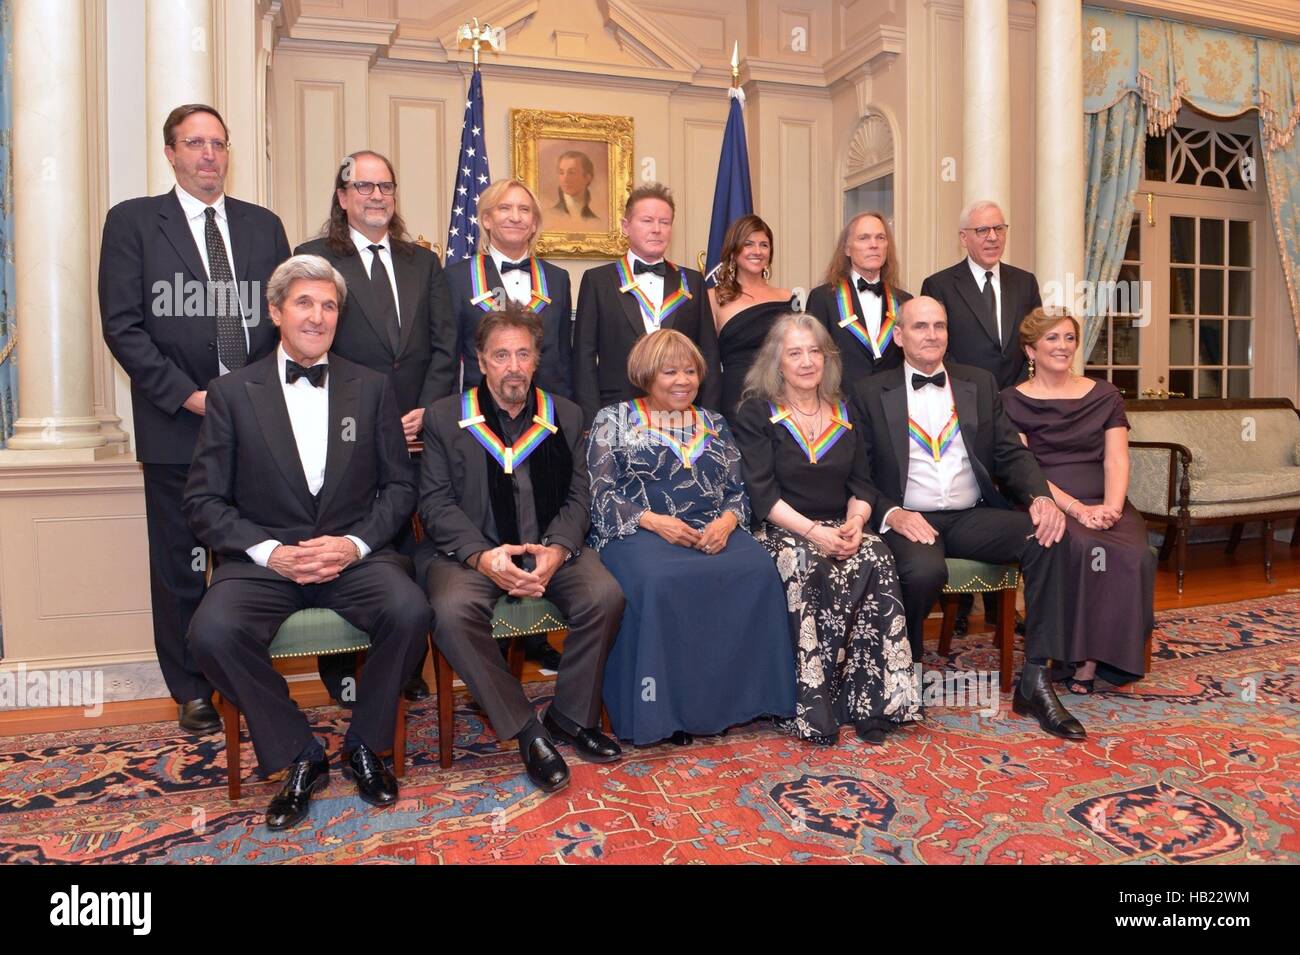 Washington DC, USA. 3rd Dec, 2016. U.S Secretary of State John Kerry poses for a group photo with the 2016 Kennedy Center Honor Award recipients following the gala dinner at the Department of State December 3, 2016 in Washington, DC. First row left to right are: Secretary of State John Kerry, Al Pacino, Mavis Staples, Martha Argerich, James Taylor, and Kennedy Center President Deborah Rutter; back row, from left: Ricky Kirshner, Glenn Weiss, Joe Walsh, Don Henley, Cindy Frey, wife of Glenn Frey, who passed away earlier this year, and Timothy Schmidt and David Rubenstein. © Planetpix/Alamy News Stock Photo